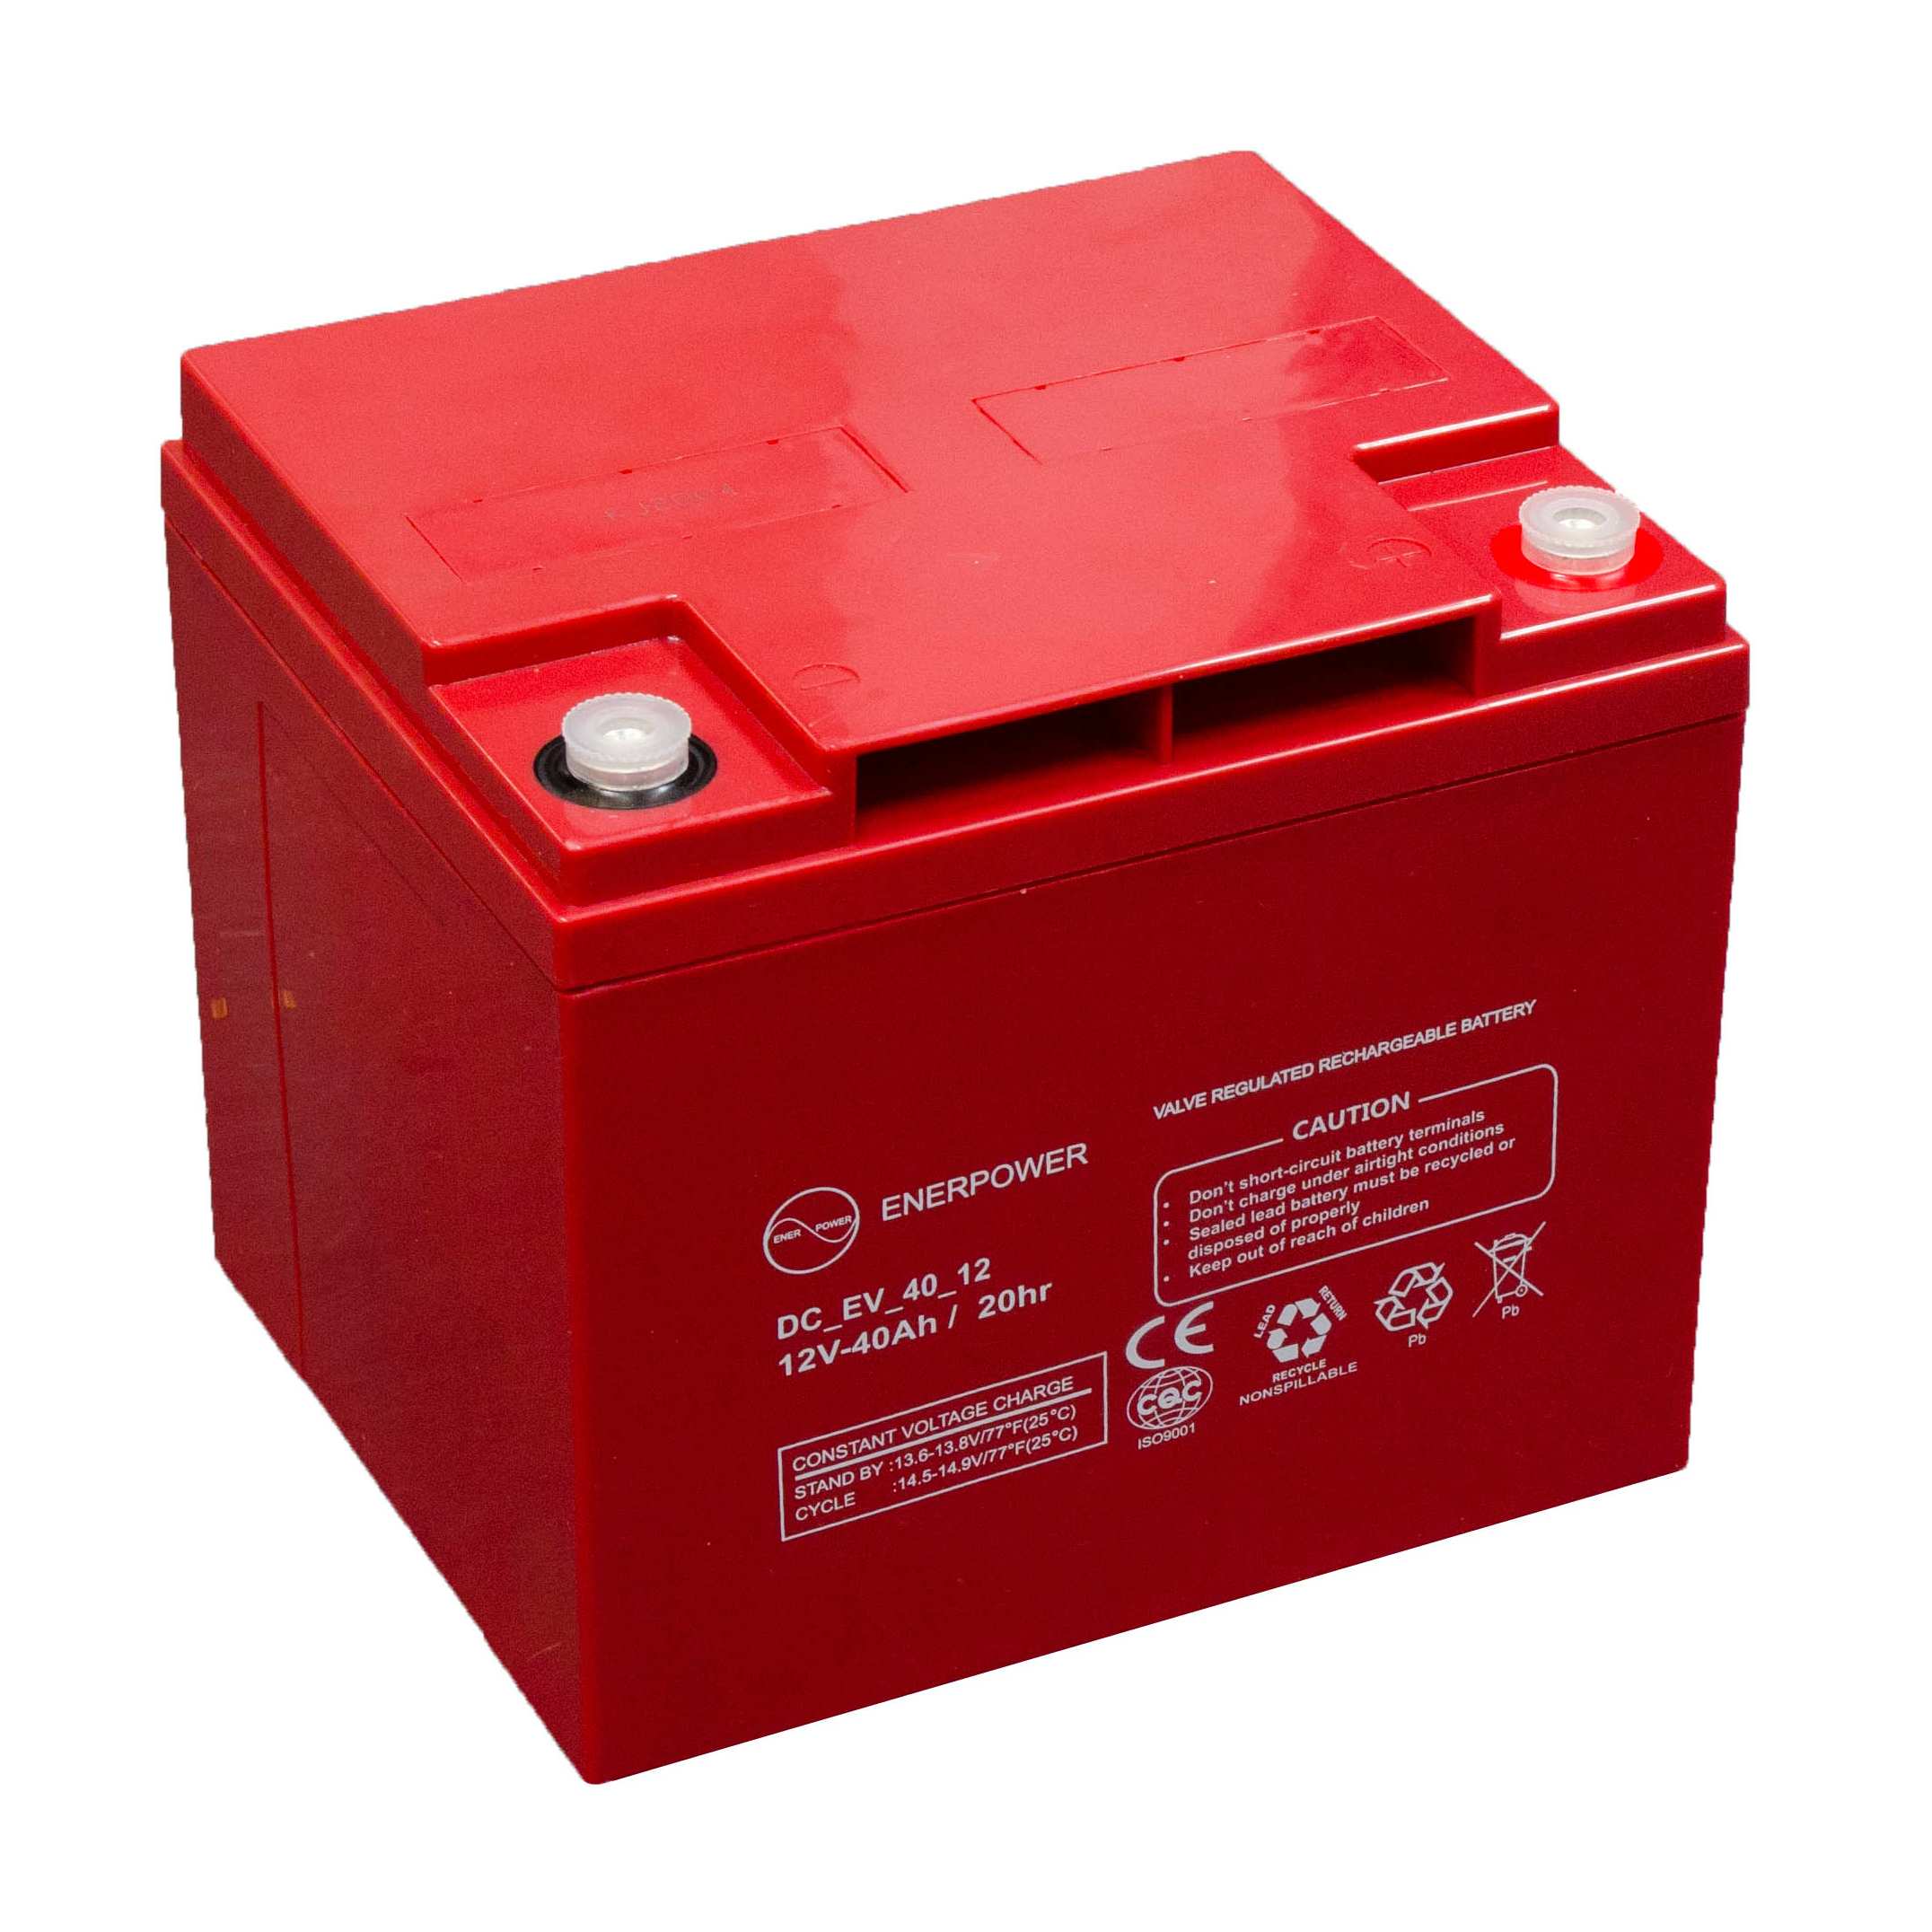 batterie dcev 40-12 12V 40Ah Cycle profond ENERPOWER